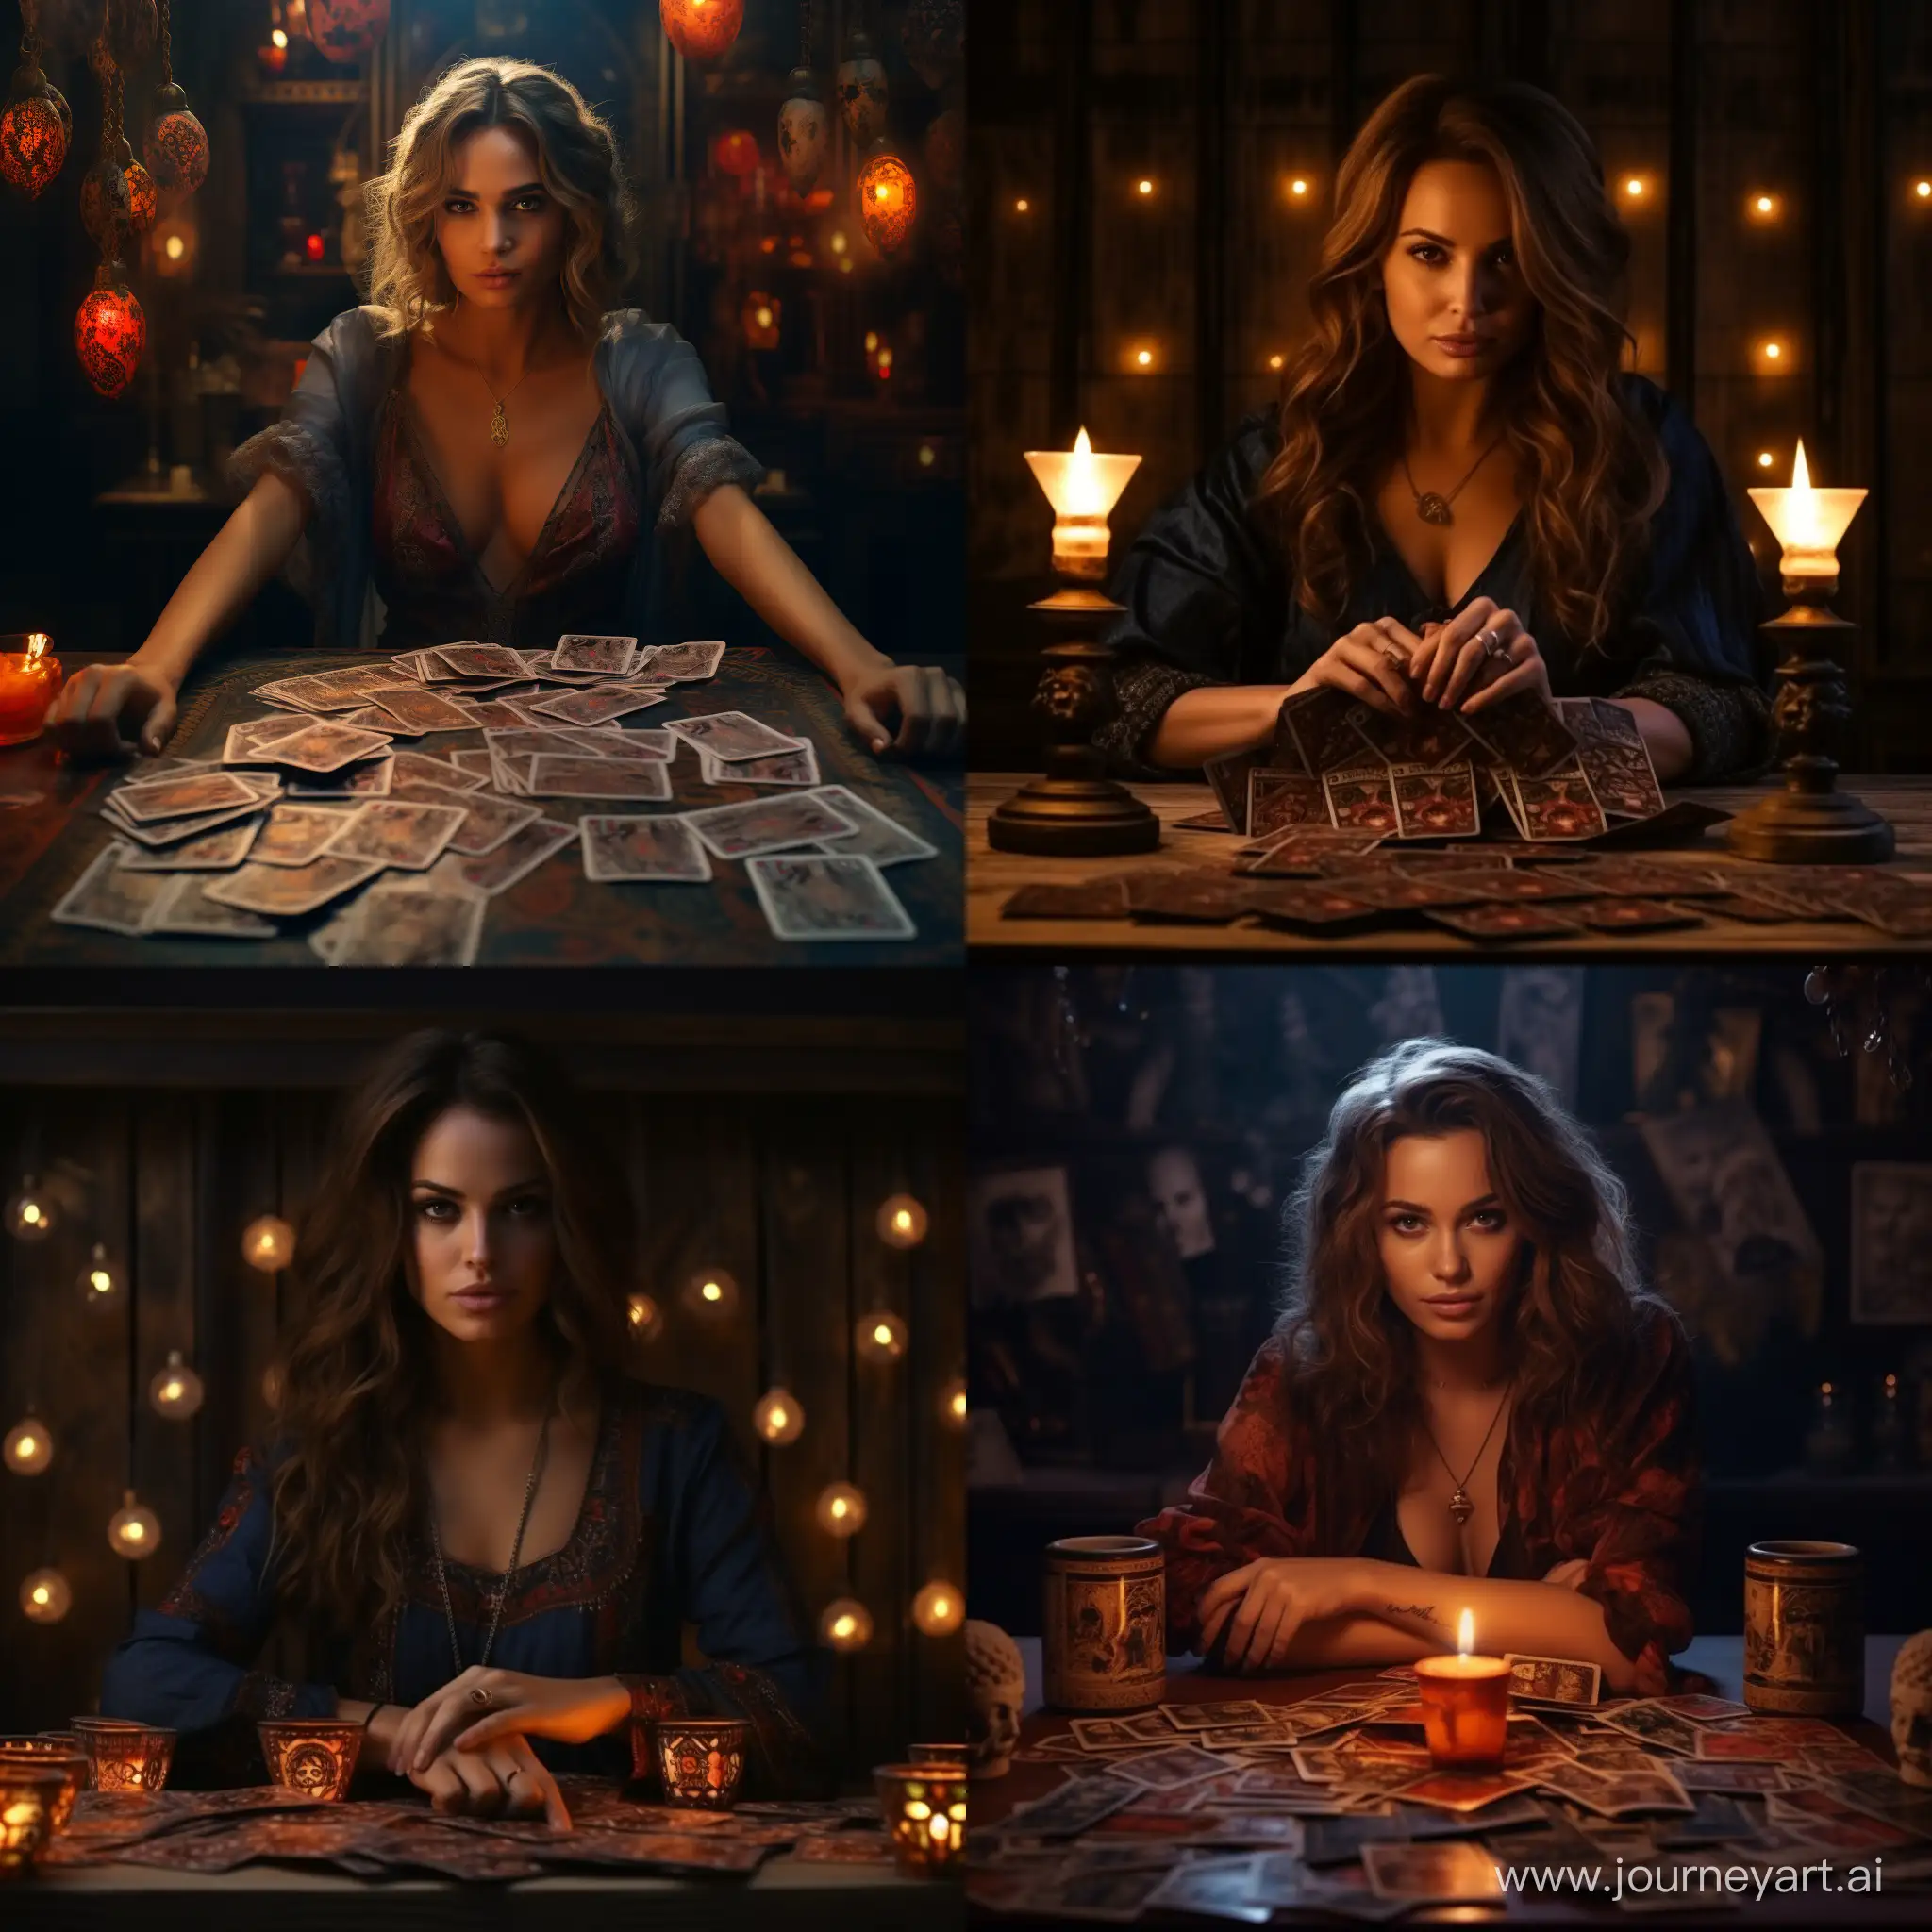 Russian-Tarot-Reader-with-Candles-and-Cards-in-Warm-Lighting